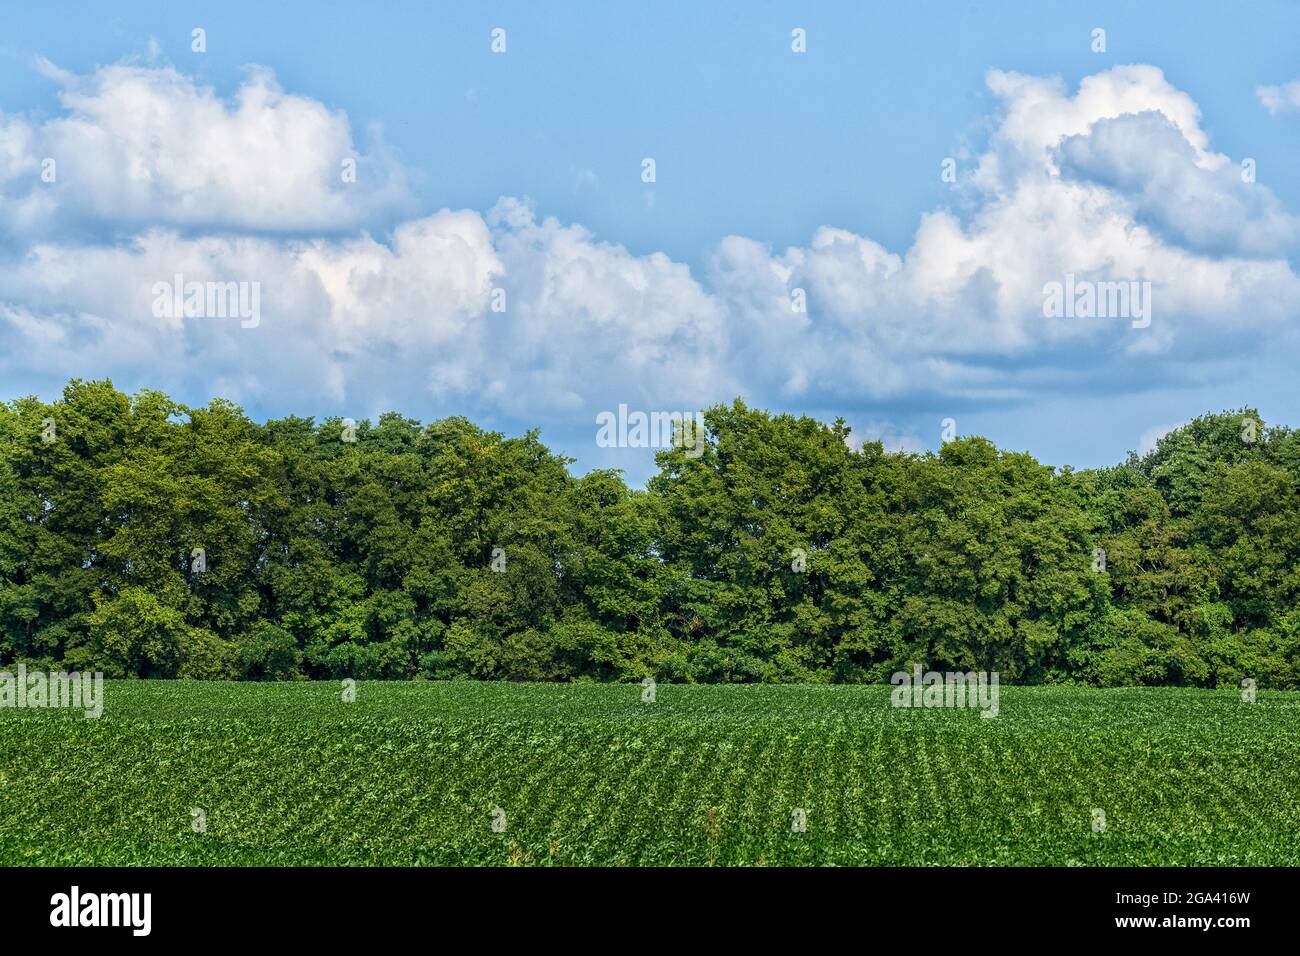 Rows of soybeans in a field, Tennessee Stock Photo